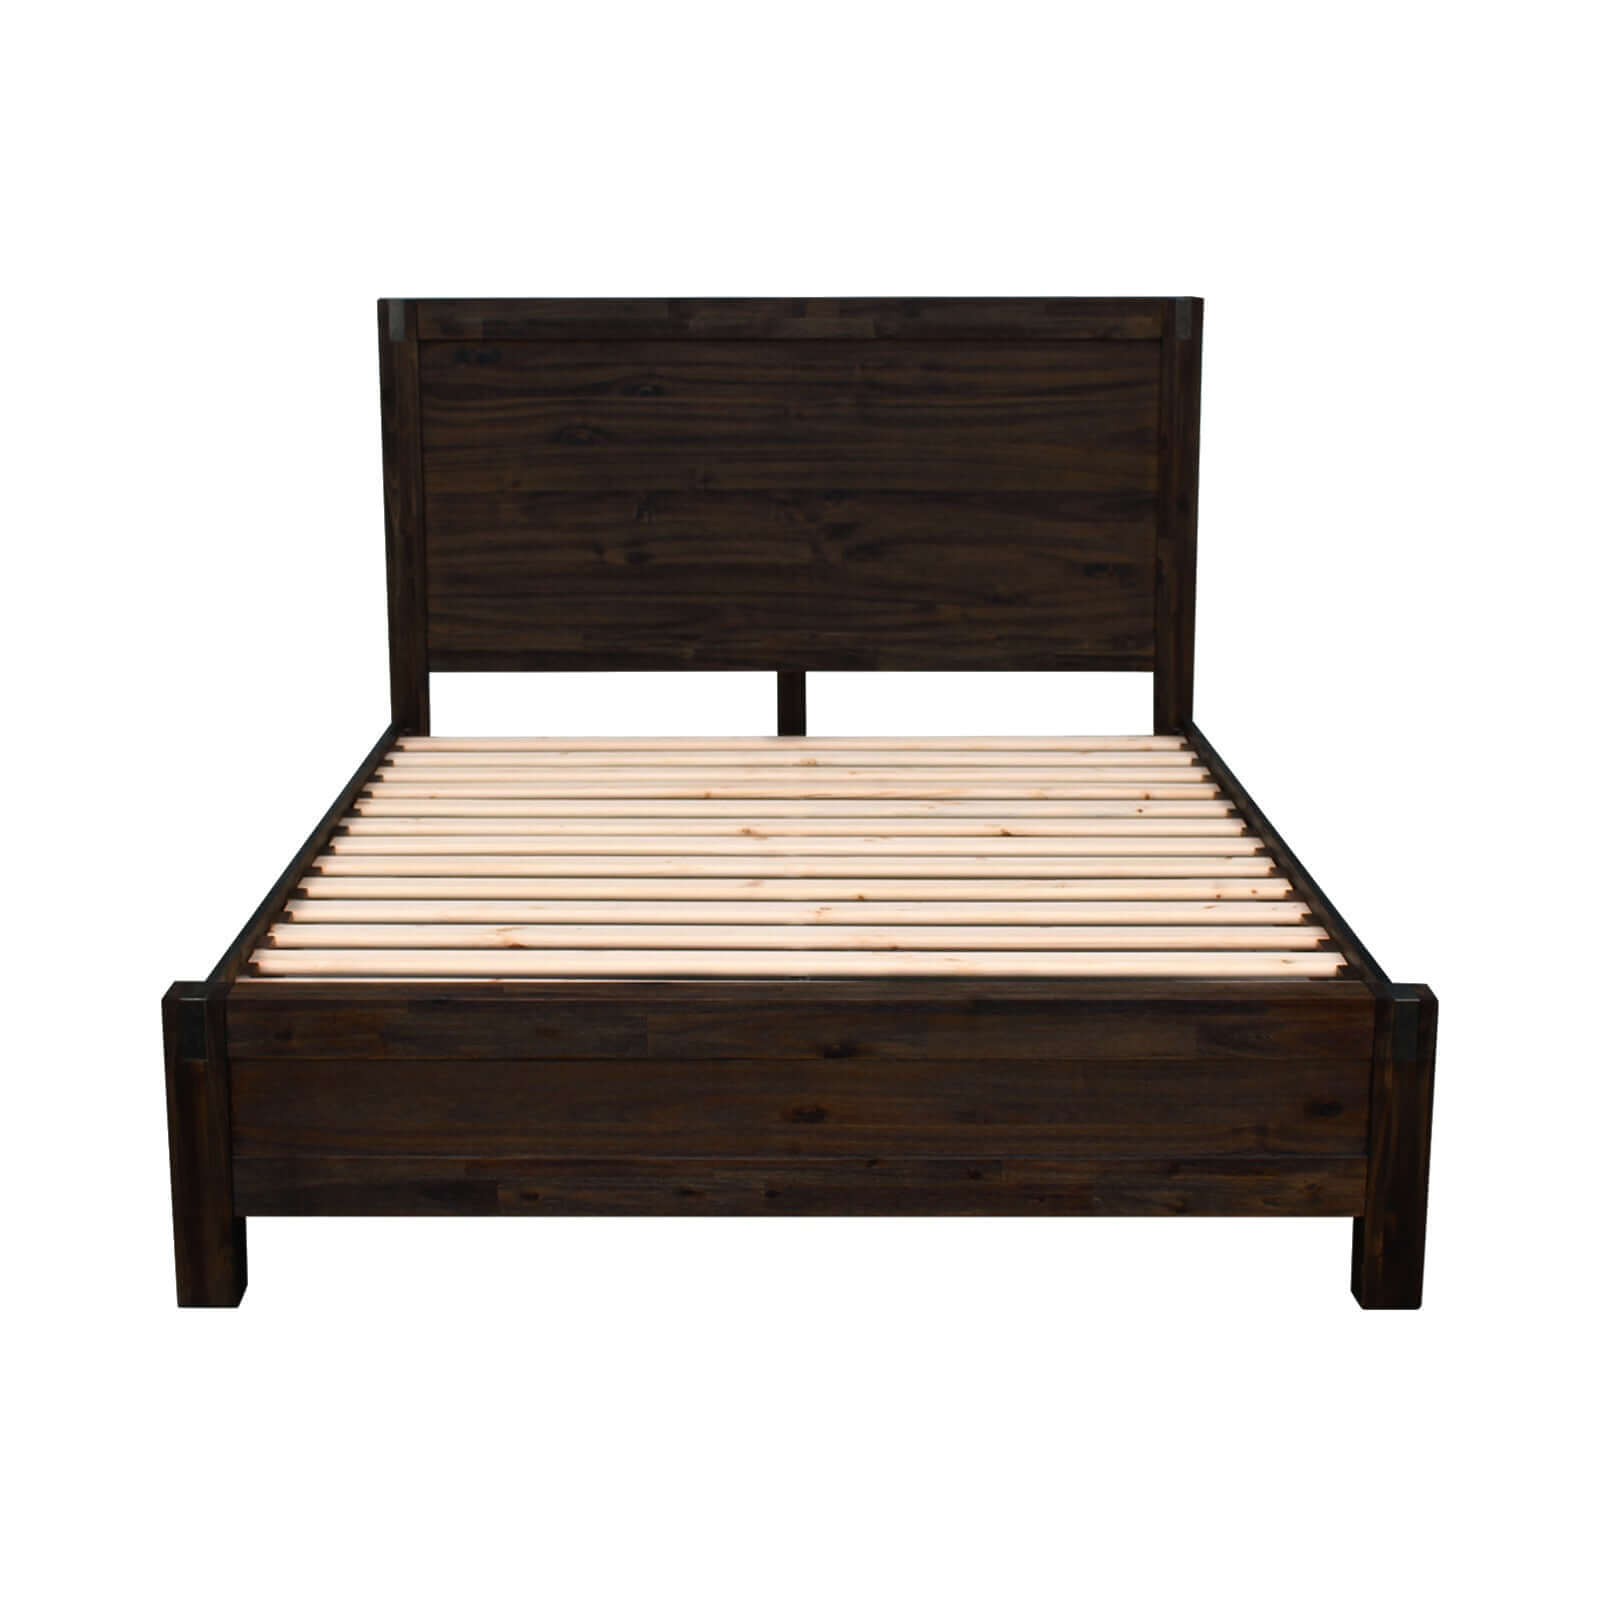 Buy 5 pieces bedroom suite in solid wood veneered acacia construction timber slat queen size chocolate colour bed bedside - upinteriors-Upinteriors